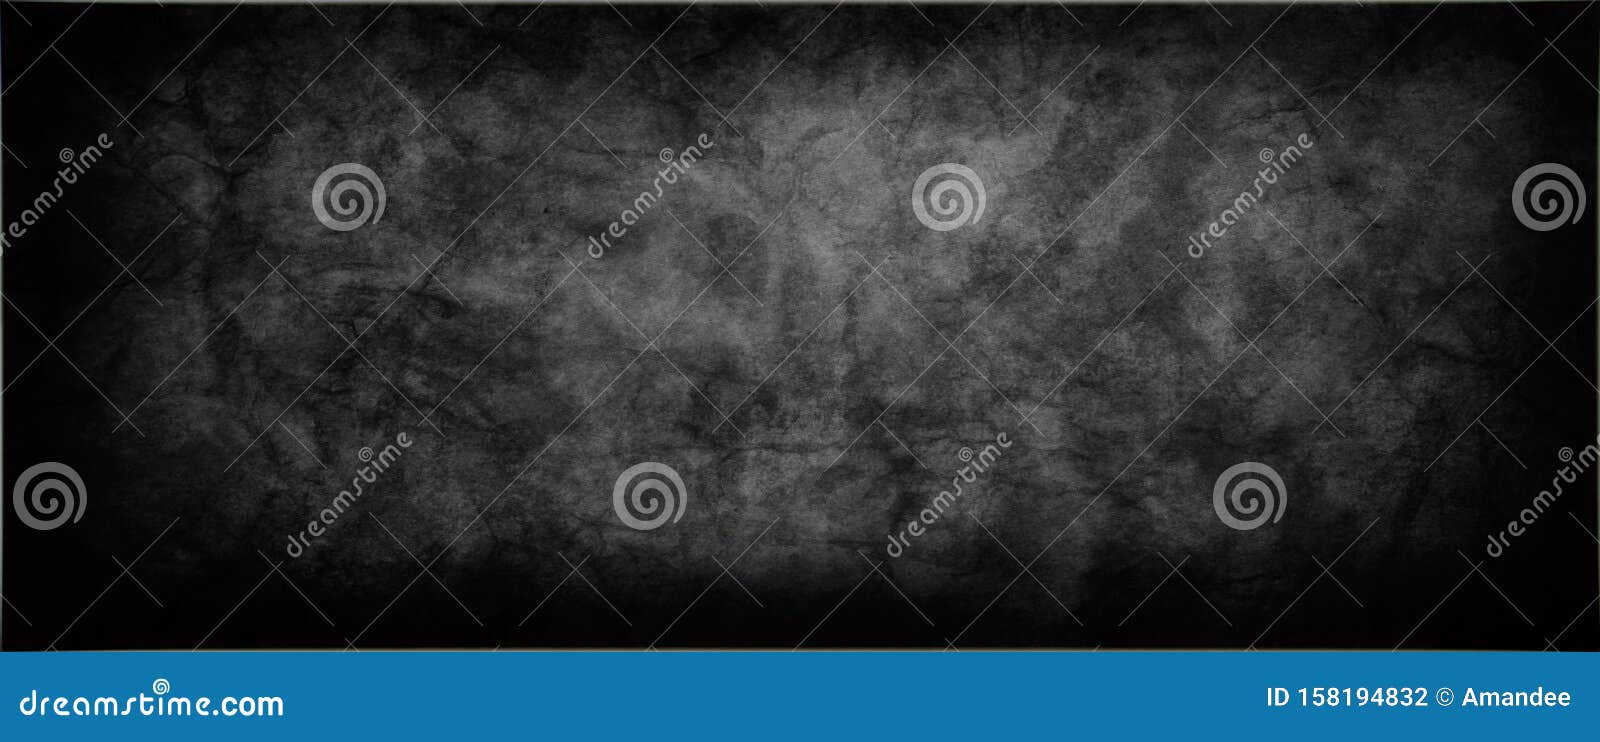 black background texture, abstract charcoal gray paper with old vintage grunge textured 